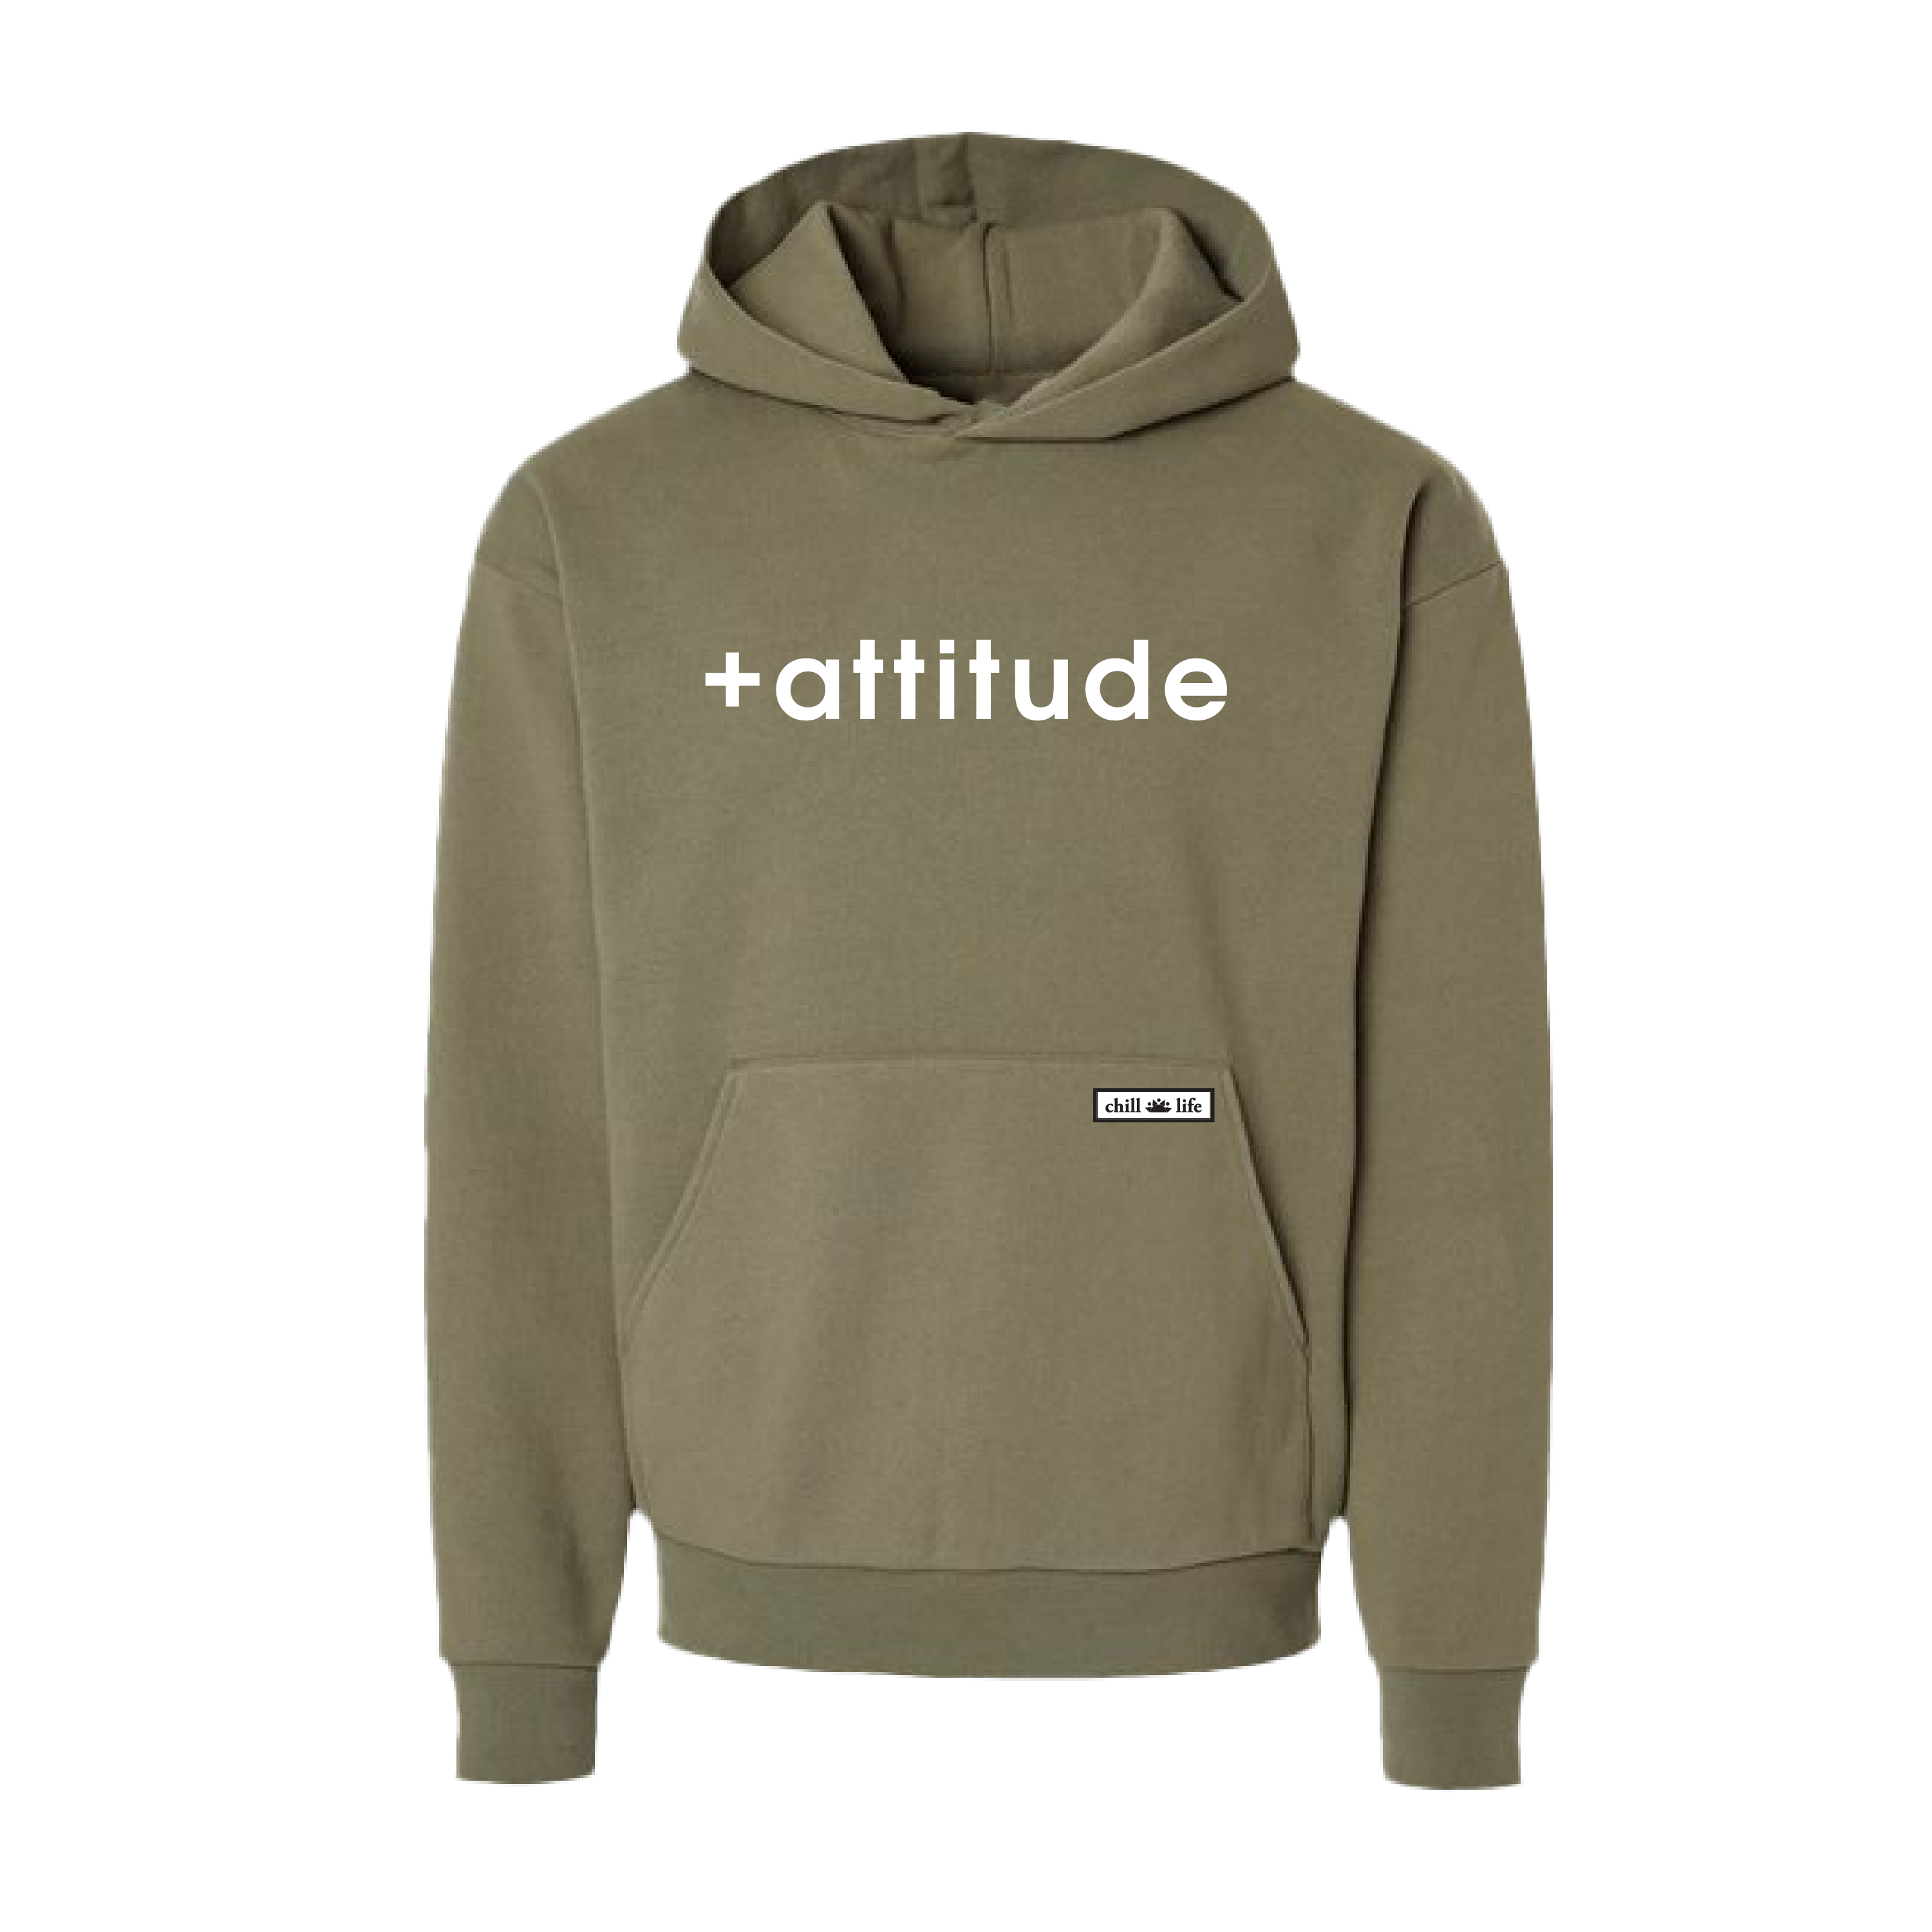 +attitude Hoodie - Olive chill life style